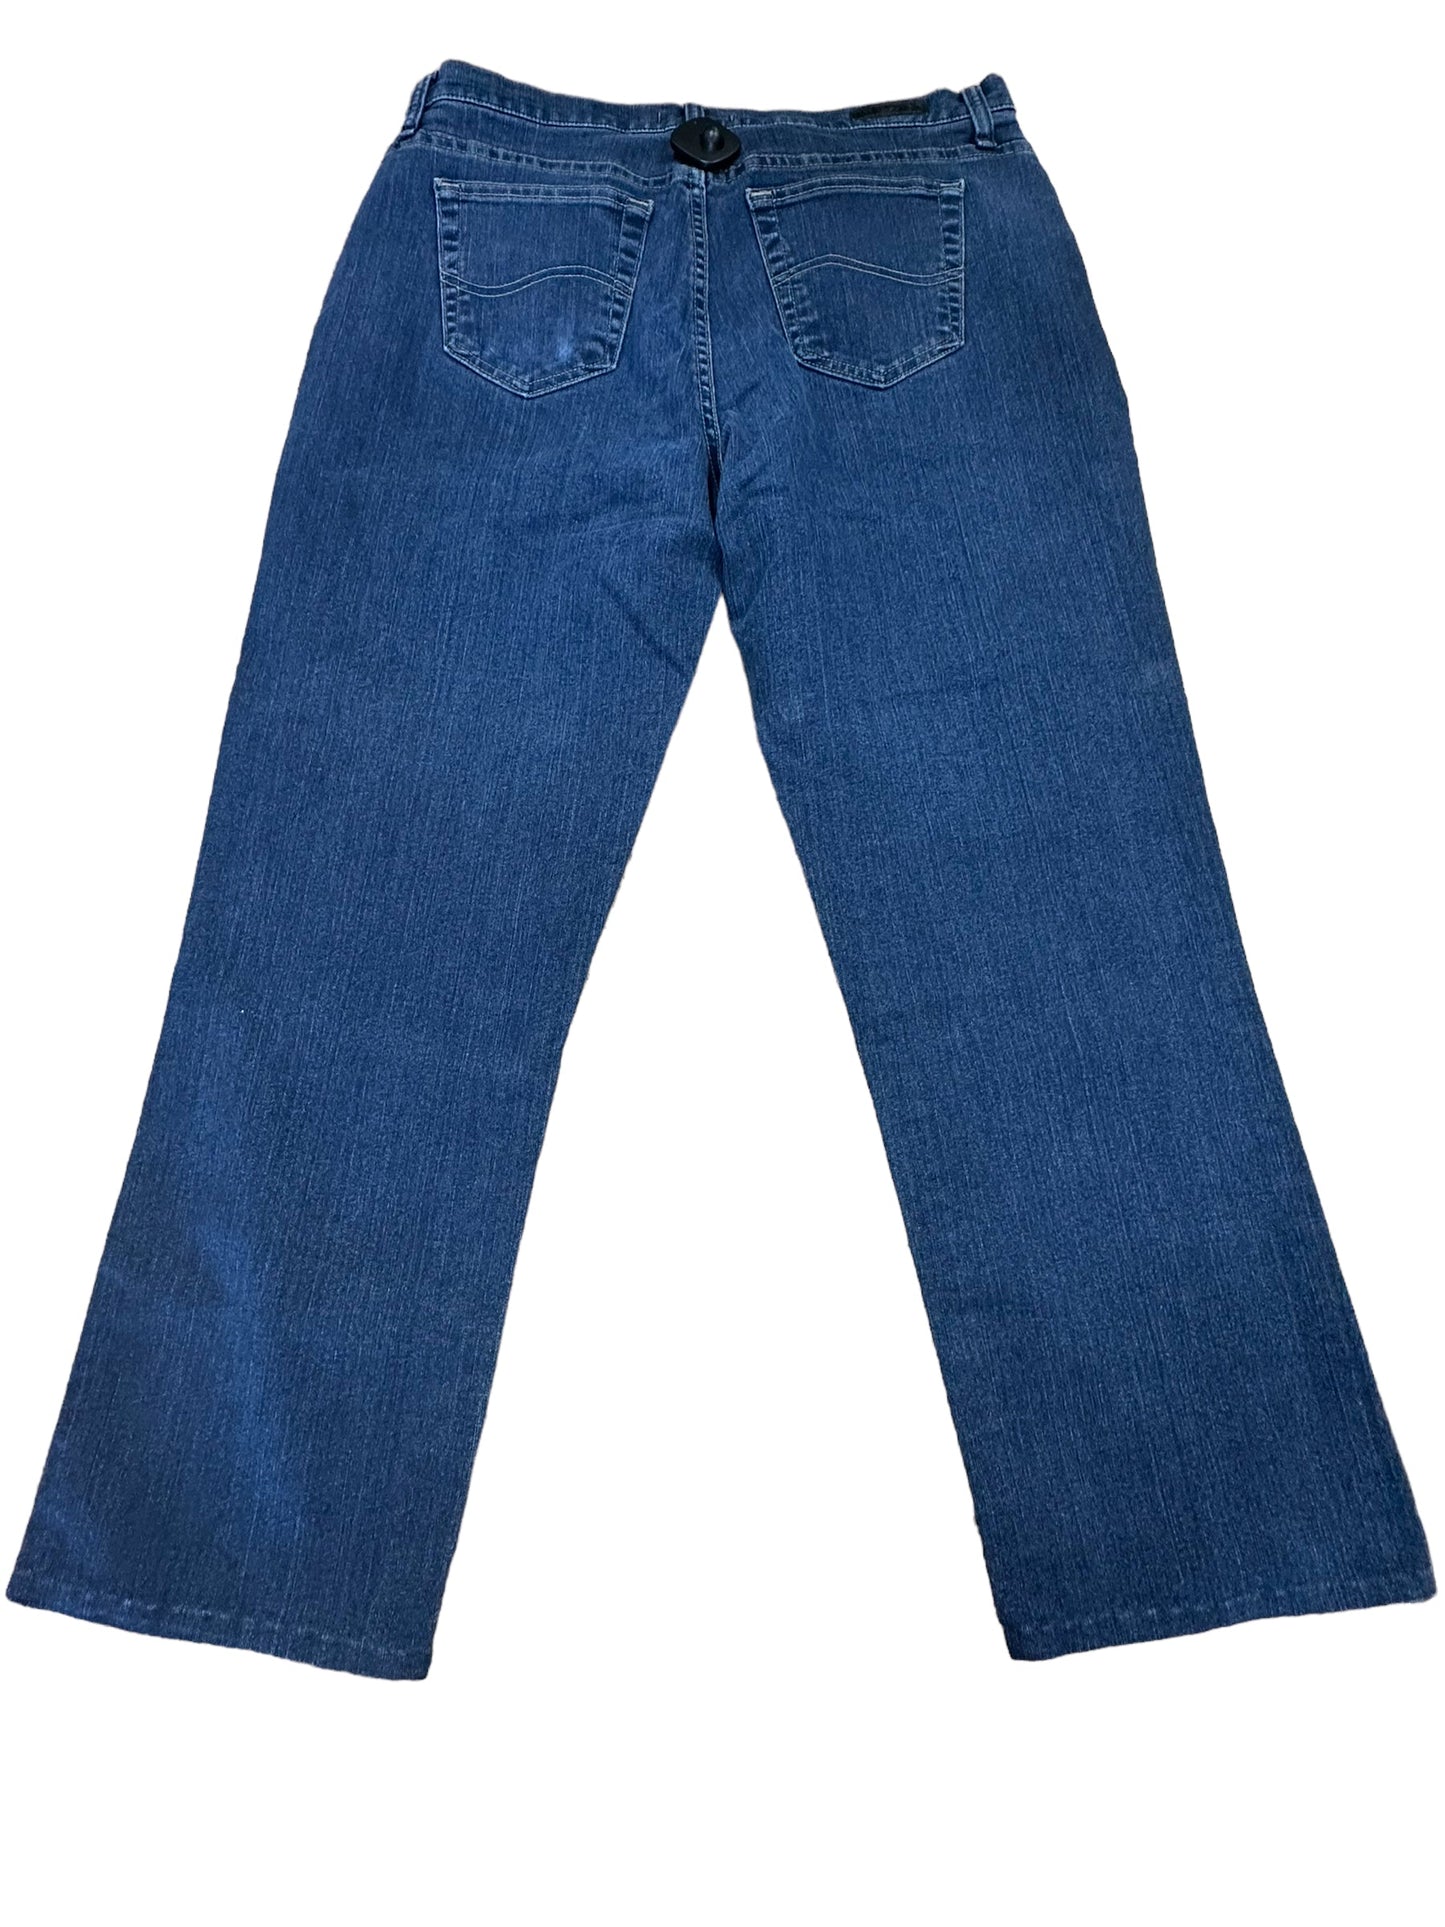 Jeans Relaxed/boyfriend By Lee  Size: 16